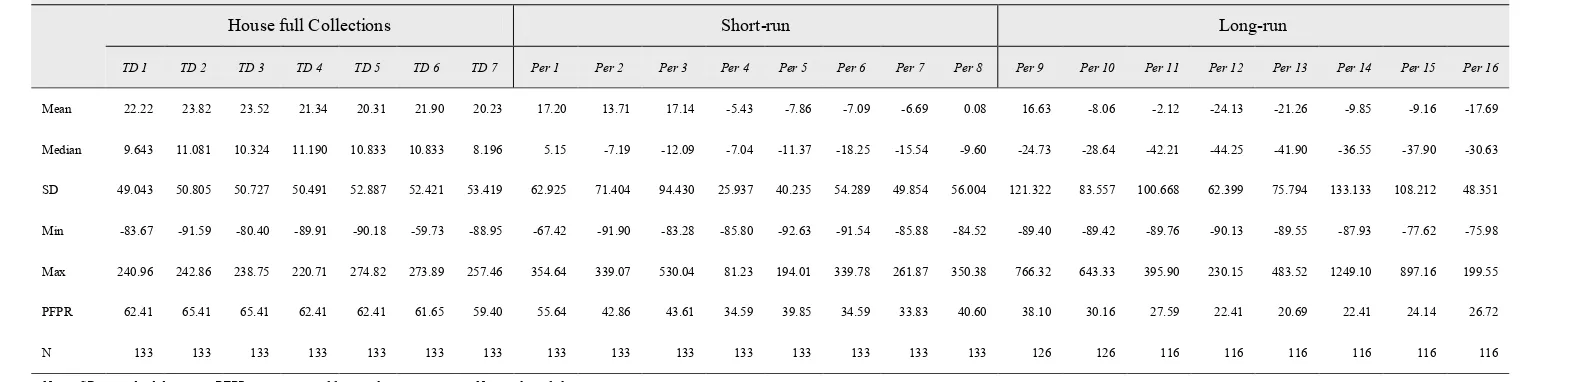 Table V. Descriptive statistics during House-full collections, Short-run and Long-run